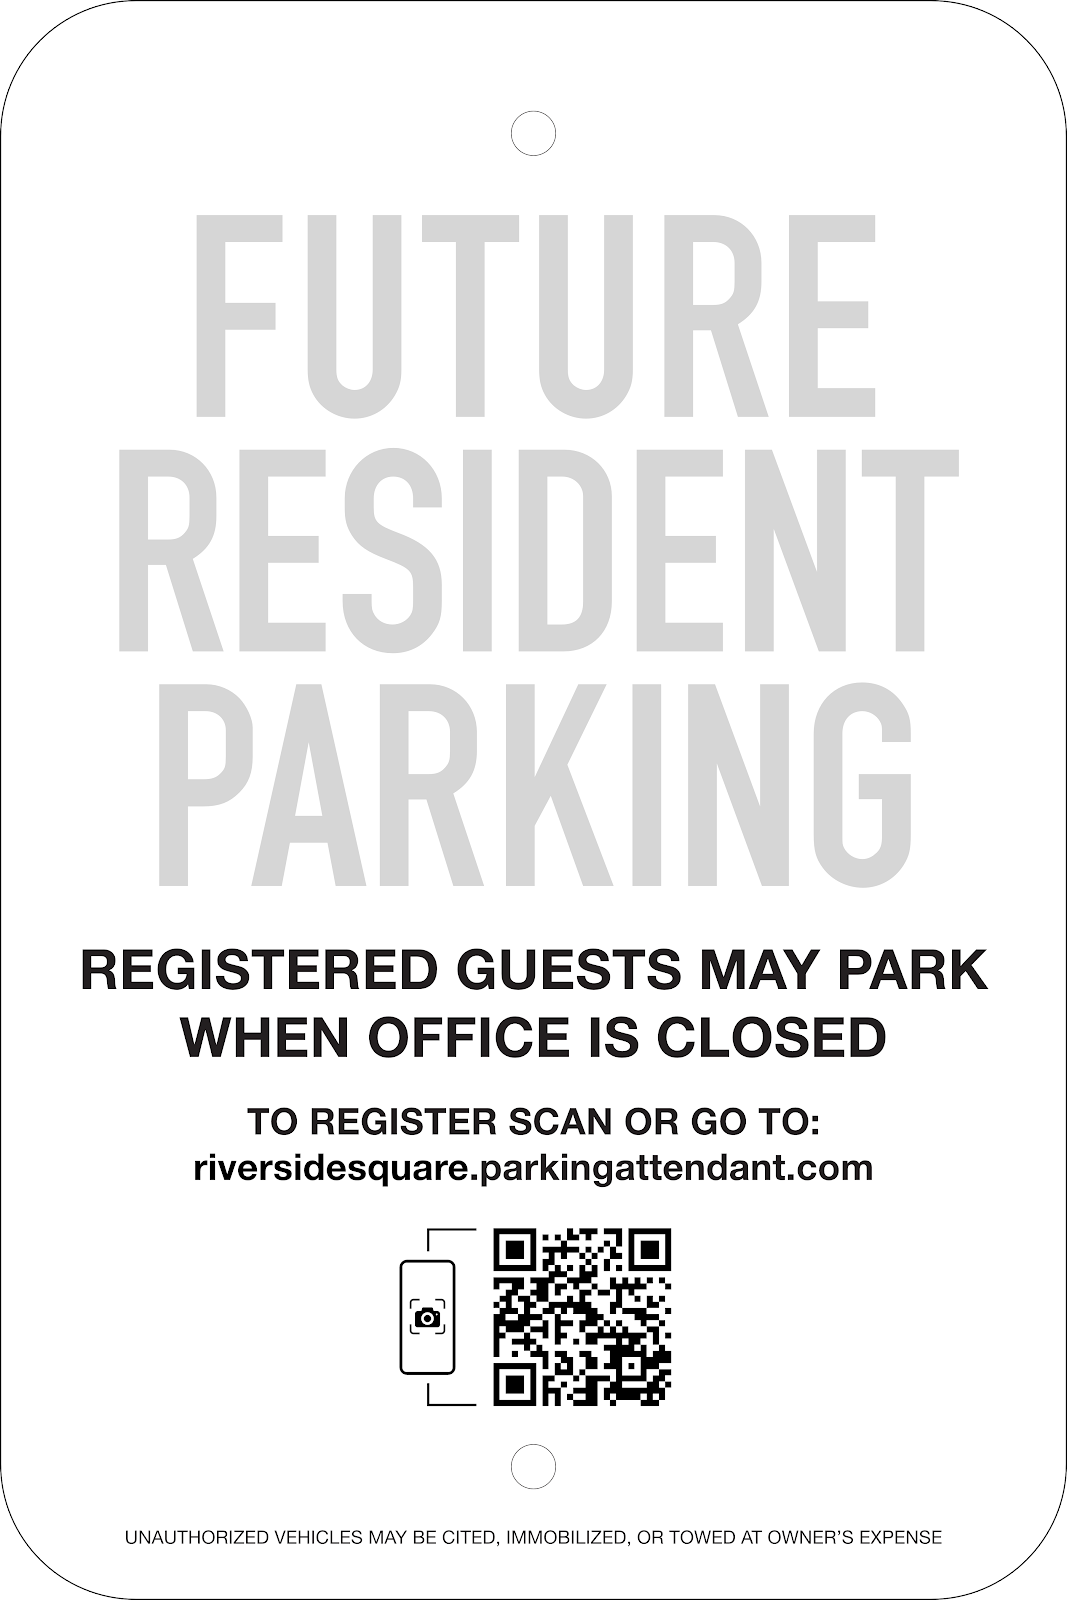 Mixed Future Resident/Guest Parking Sign Self-Registration: Option #1, 12x18